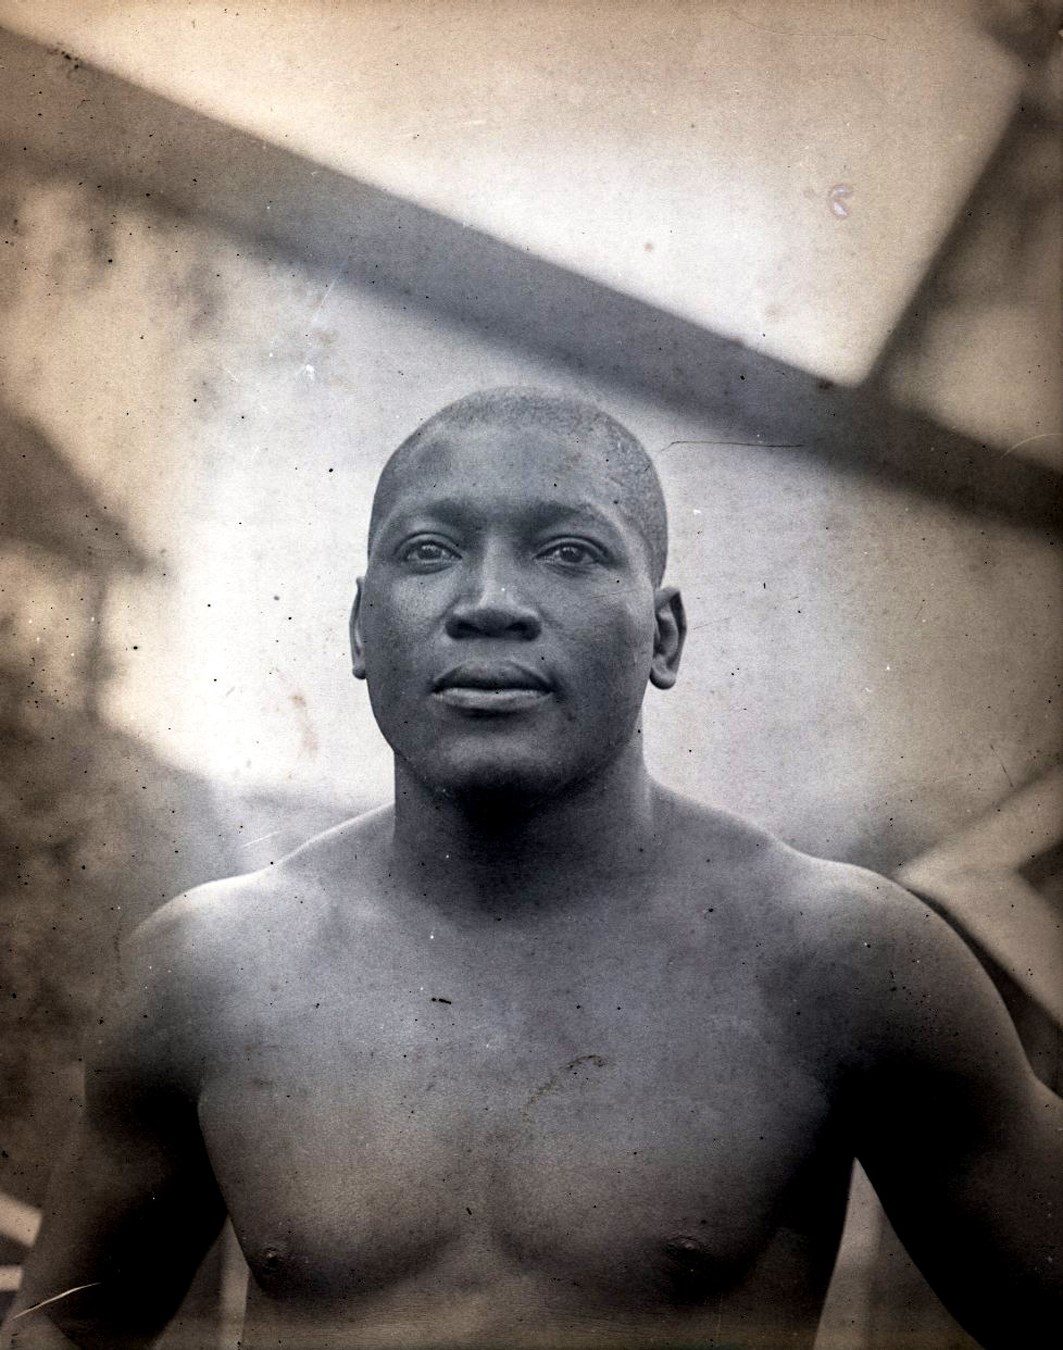 Dana Collection Of Important Boxing Negatives - Early 1900s Jack Johnson "Unusual Portrait" Type I Glass Plate Negative by Dana Studio